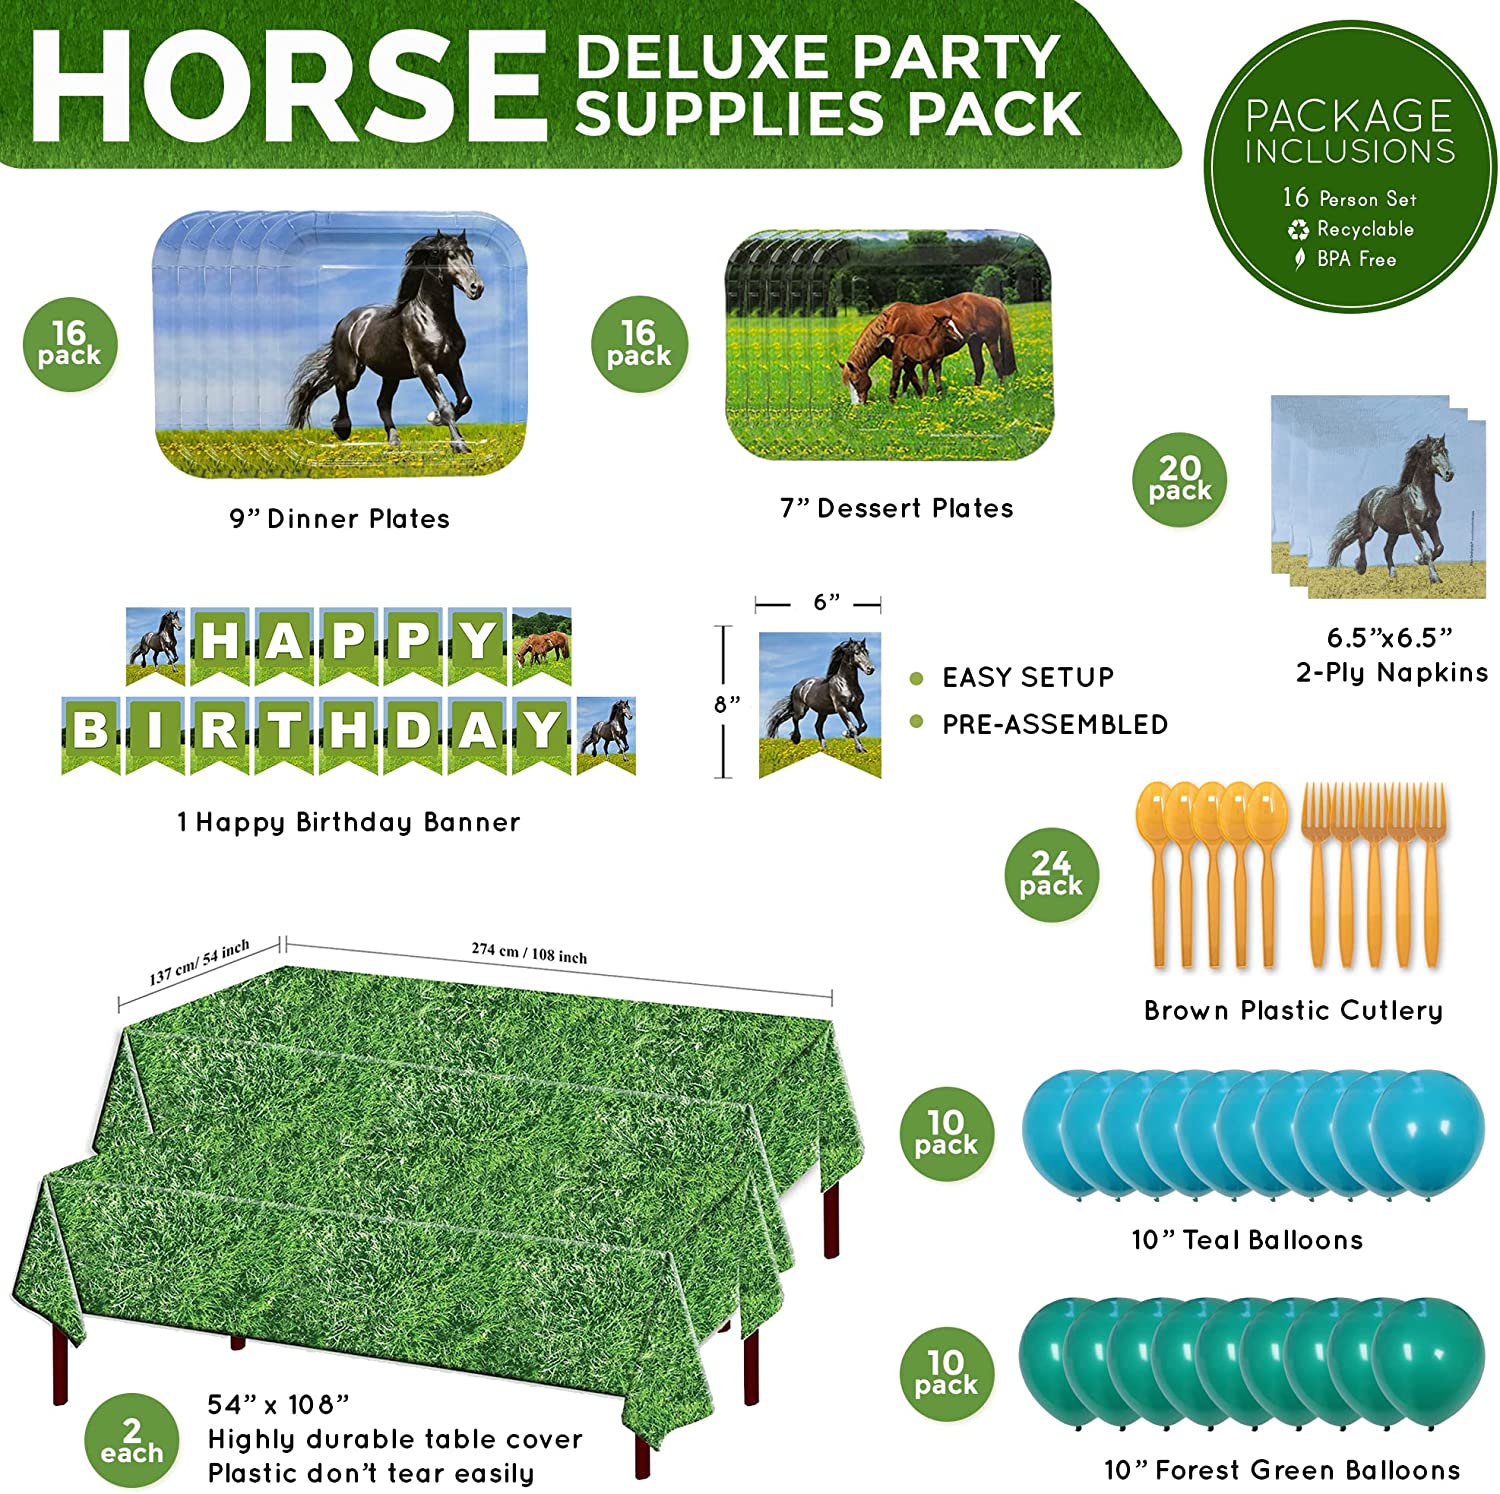 Image of the Horse Deluxe Party Supplies Pack for up to 16 guests. The pack contains 16 9-inch dinner plates, 16 7-inch dessert plates, and 20 lunch napkins, all featuring a fun and colorful horse design. It also includes a happy birthday banner, 24 brown forks, and 24 brown spoons for easy and convenient serving. Additionally, the pack comes with 2 108"x54" grass table covers, 10 forest green balloons, and 10 teal balloons to help you decorate your party space in style.